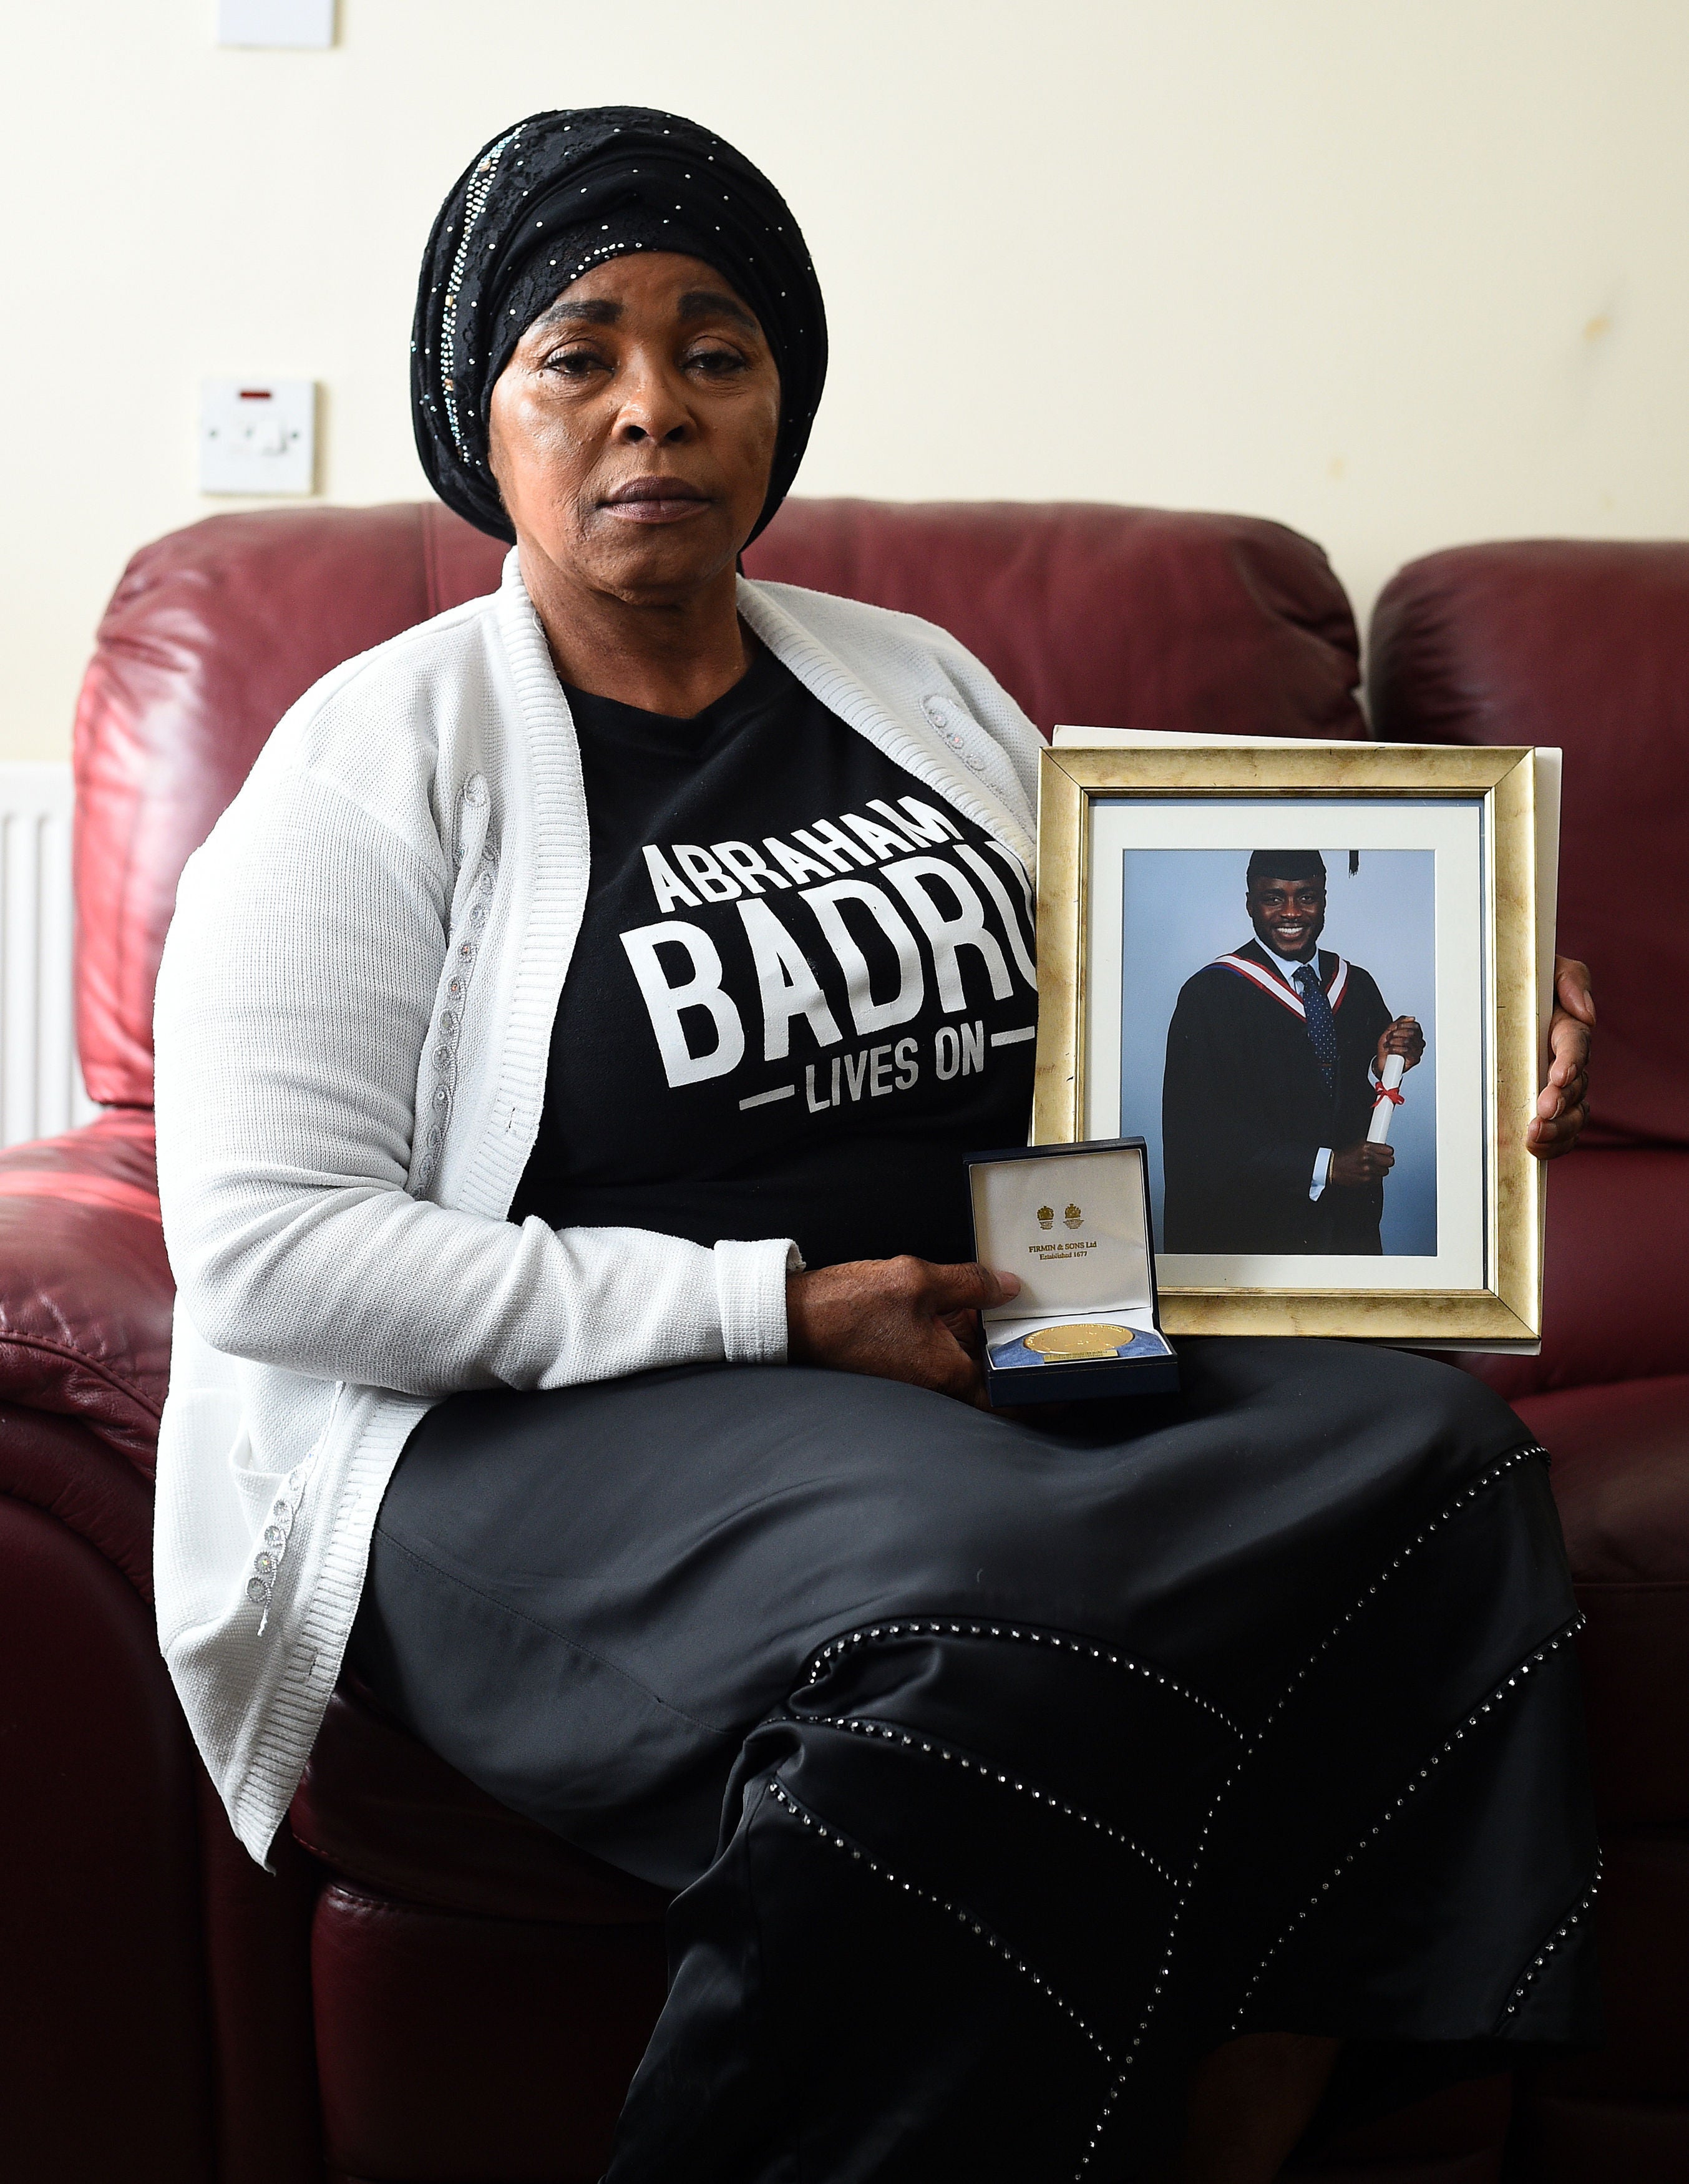 His mother Ronke Ali Badru is still fighting for justice